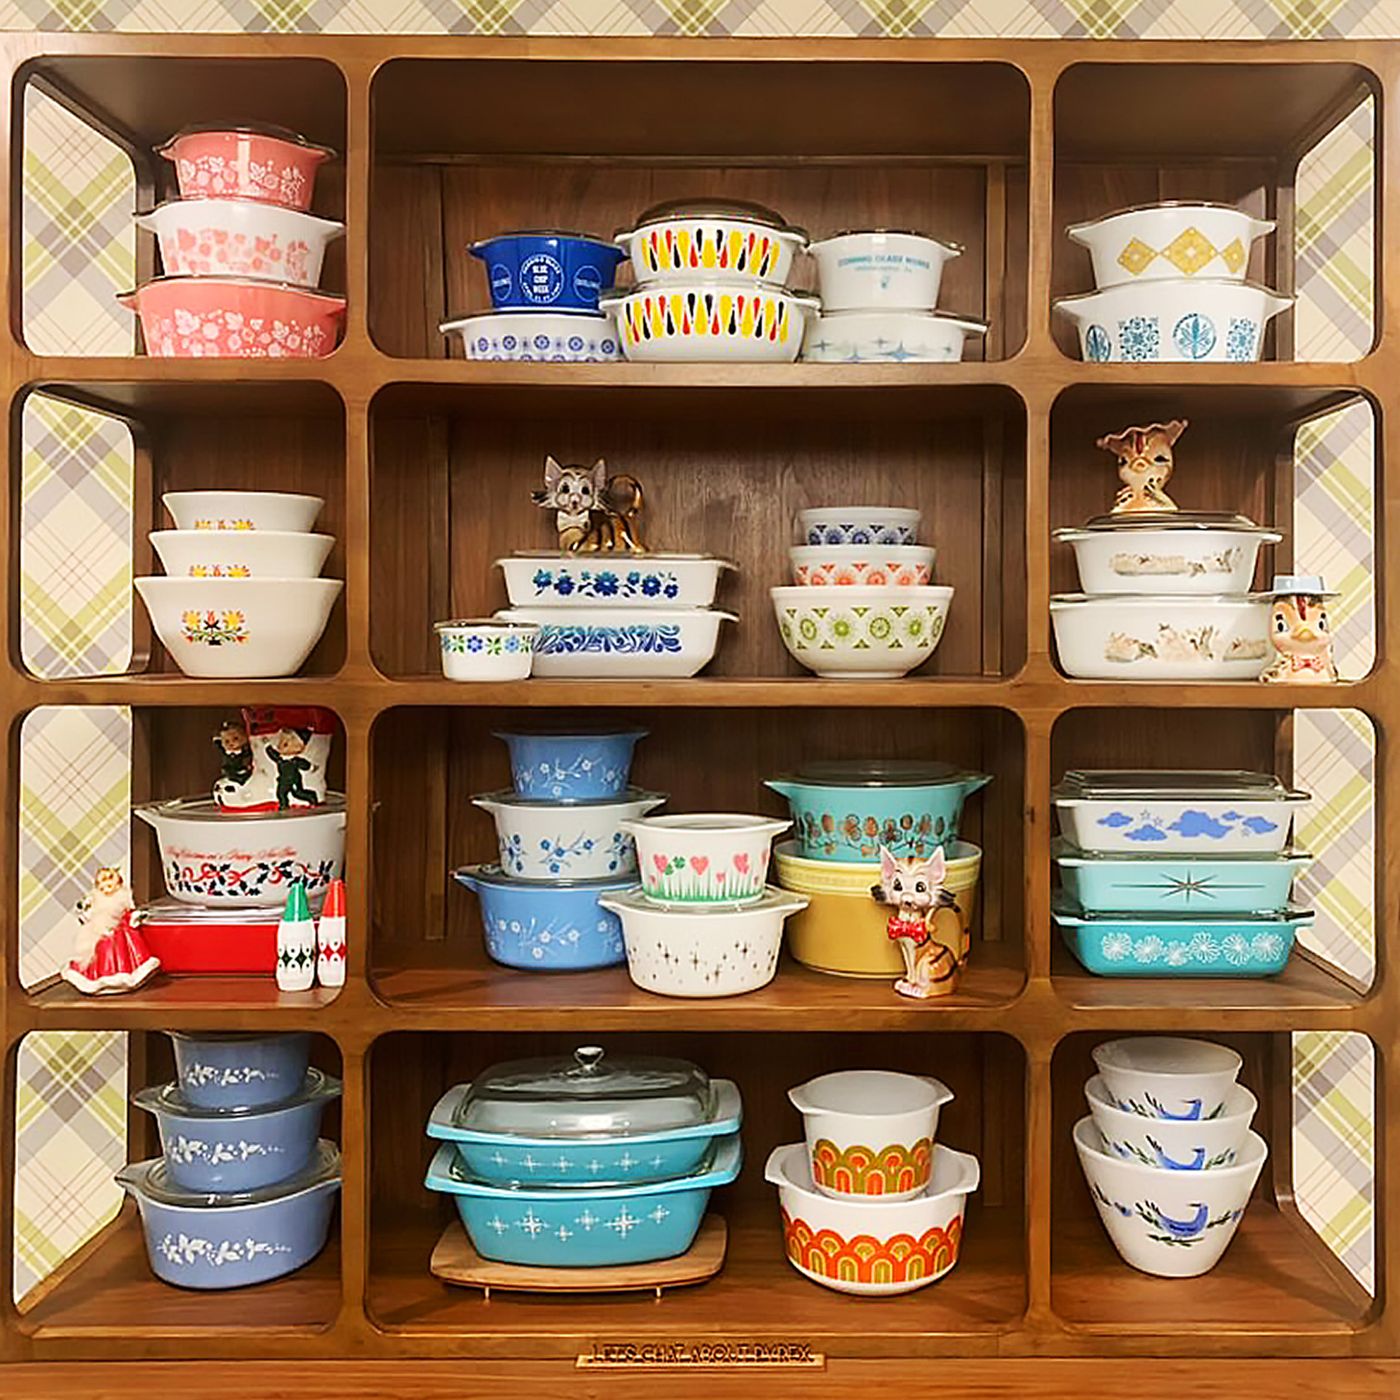 Pyrex: Demand growing for a little ceramic dish - The Signal